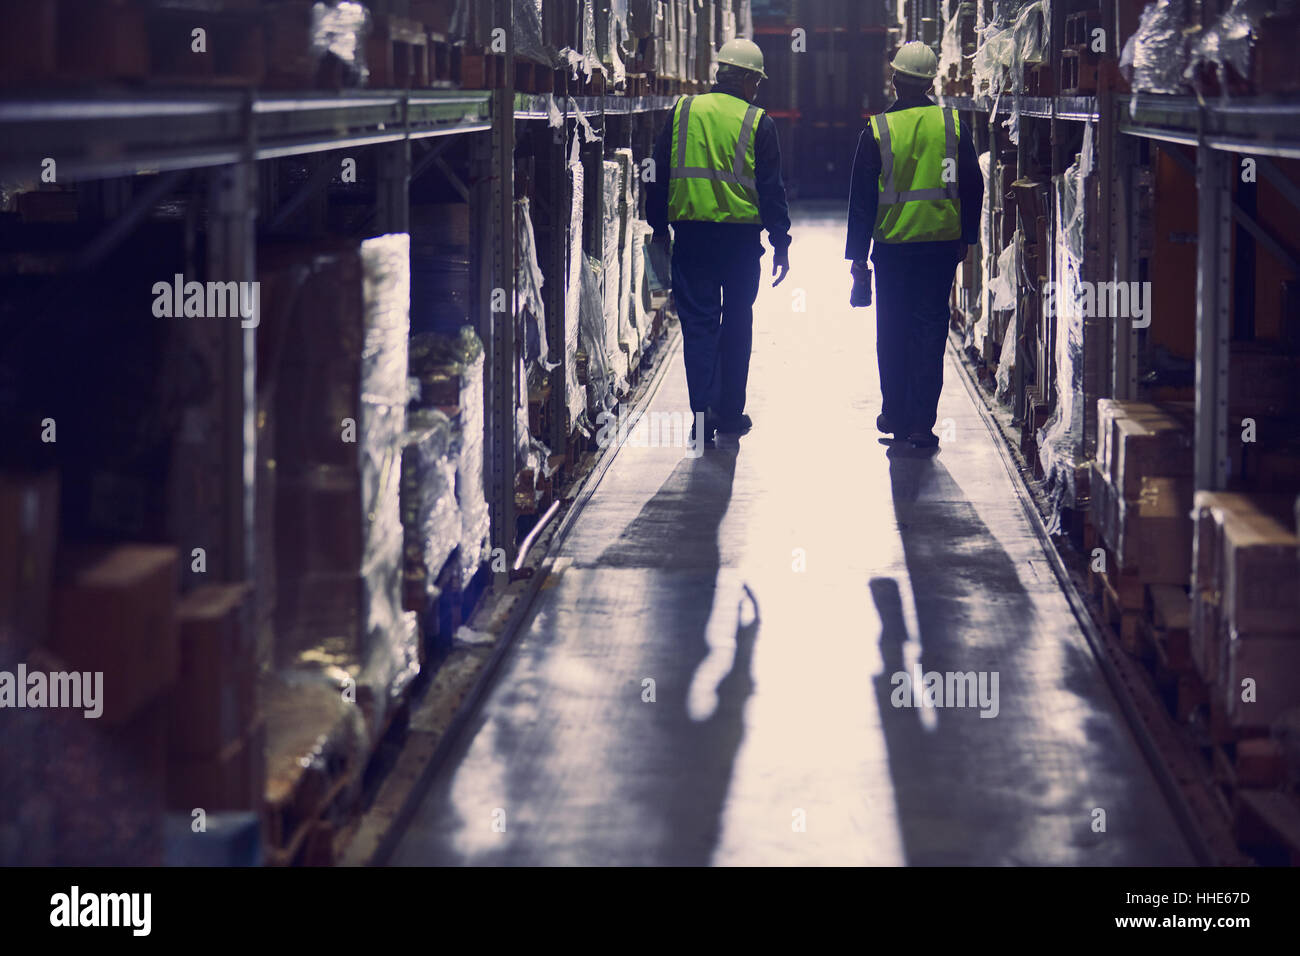 Workers walking in aisle of distribution warehouse Stock Photo